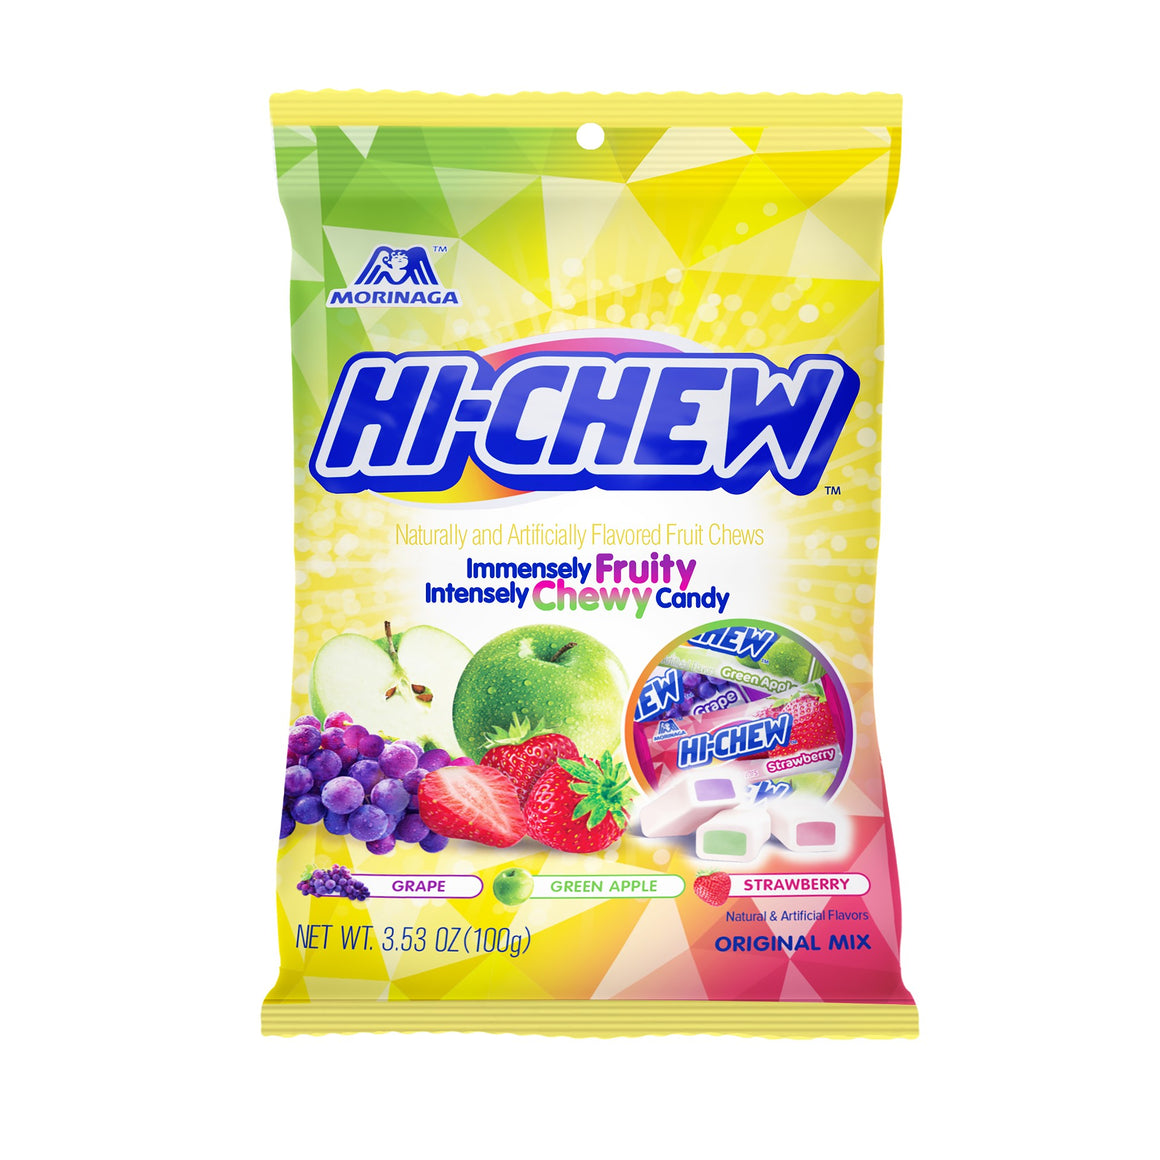 All City Candy Hi-Chew Original Mix Fruit Chews Bags 3.53-oz. Bag Chewy Morinaga & Company For fresh candy and great service, visit www.allcitycandy.com